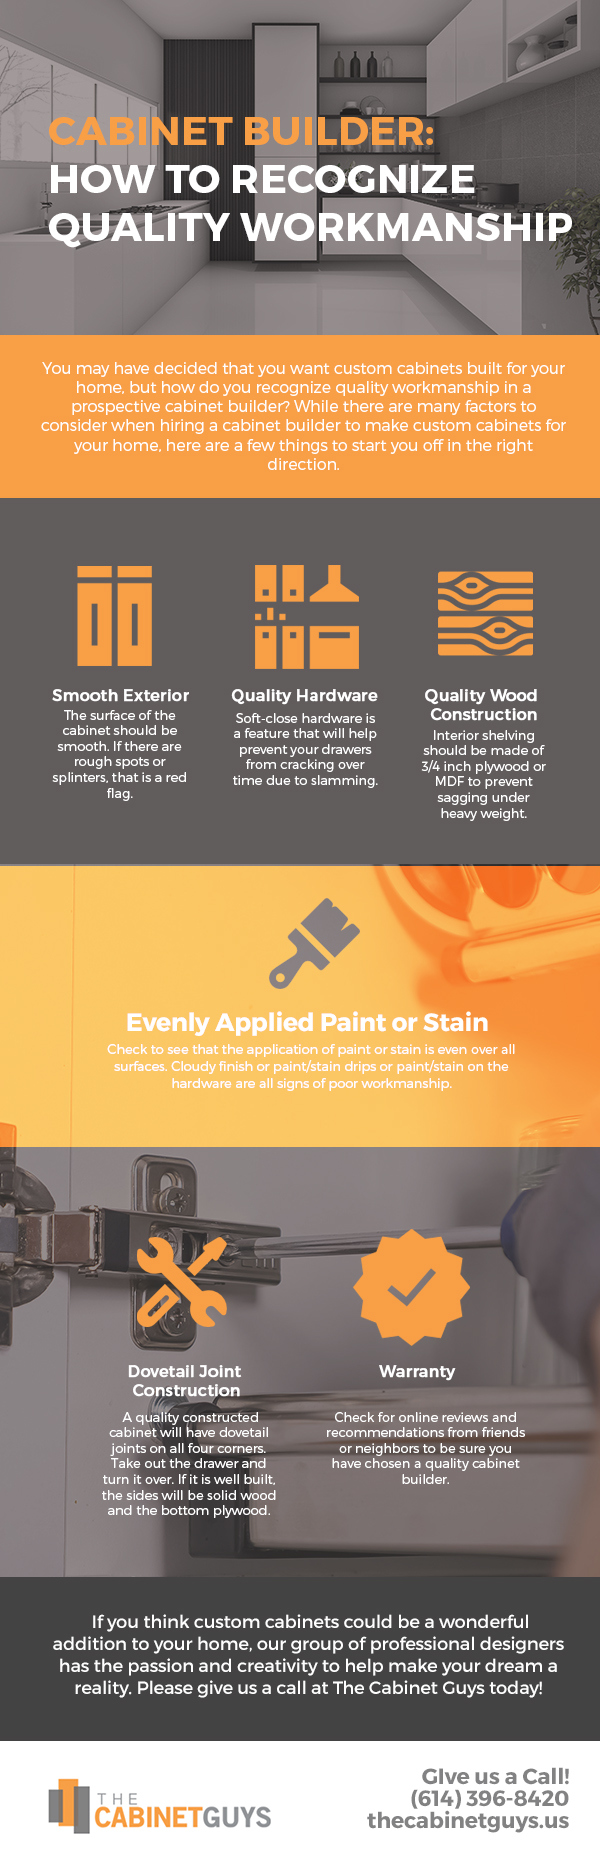 Cabinet Builder: How to Recognize Quality Workmanship [infographic]